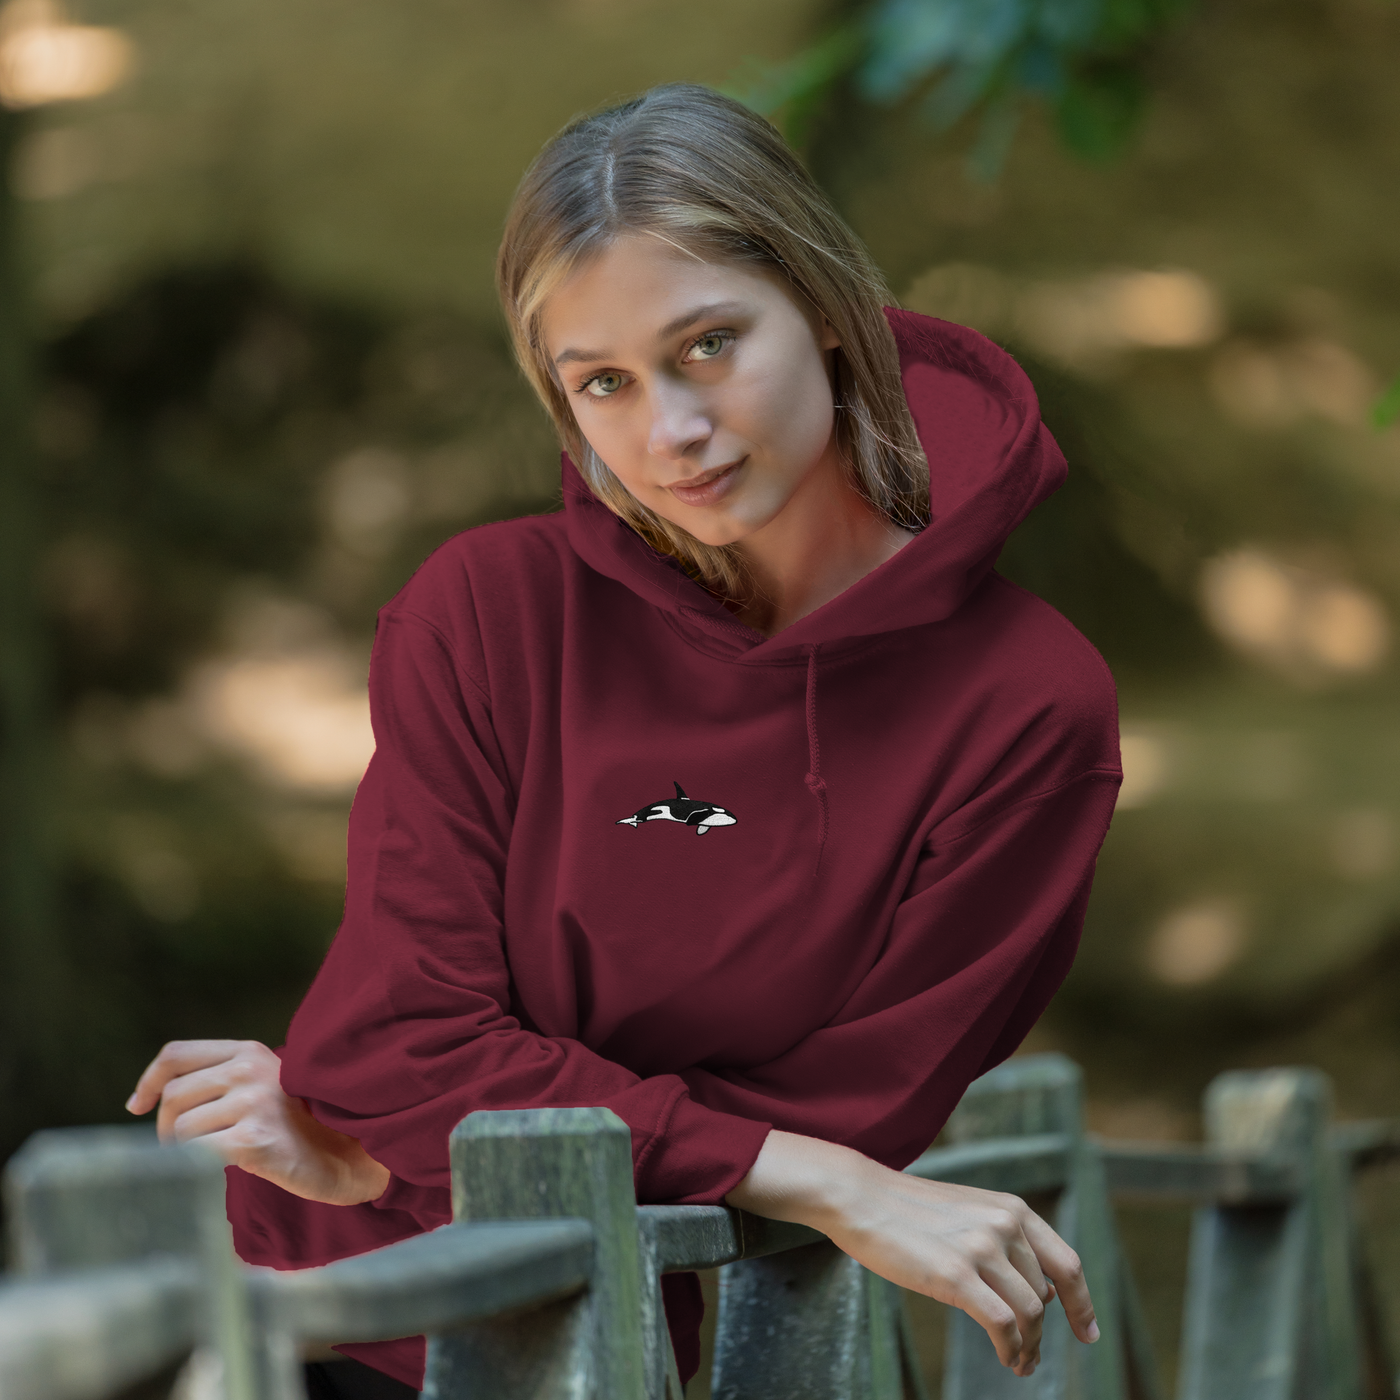 Bobby's Planet Women's Embroidered Orca Hoodie from Seven Seas Fish Animals Collection in Maroon Color#color_maroon